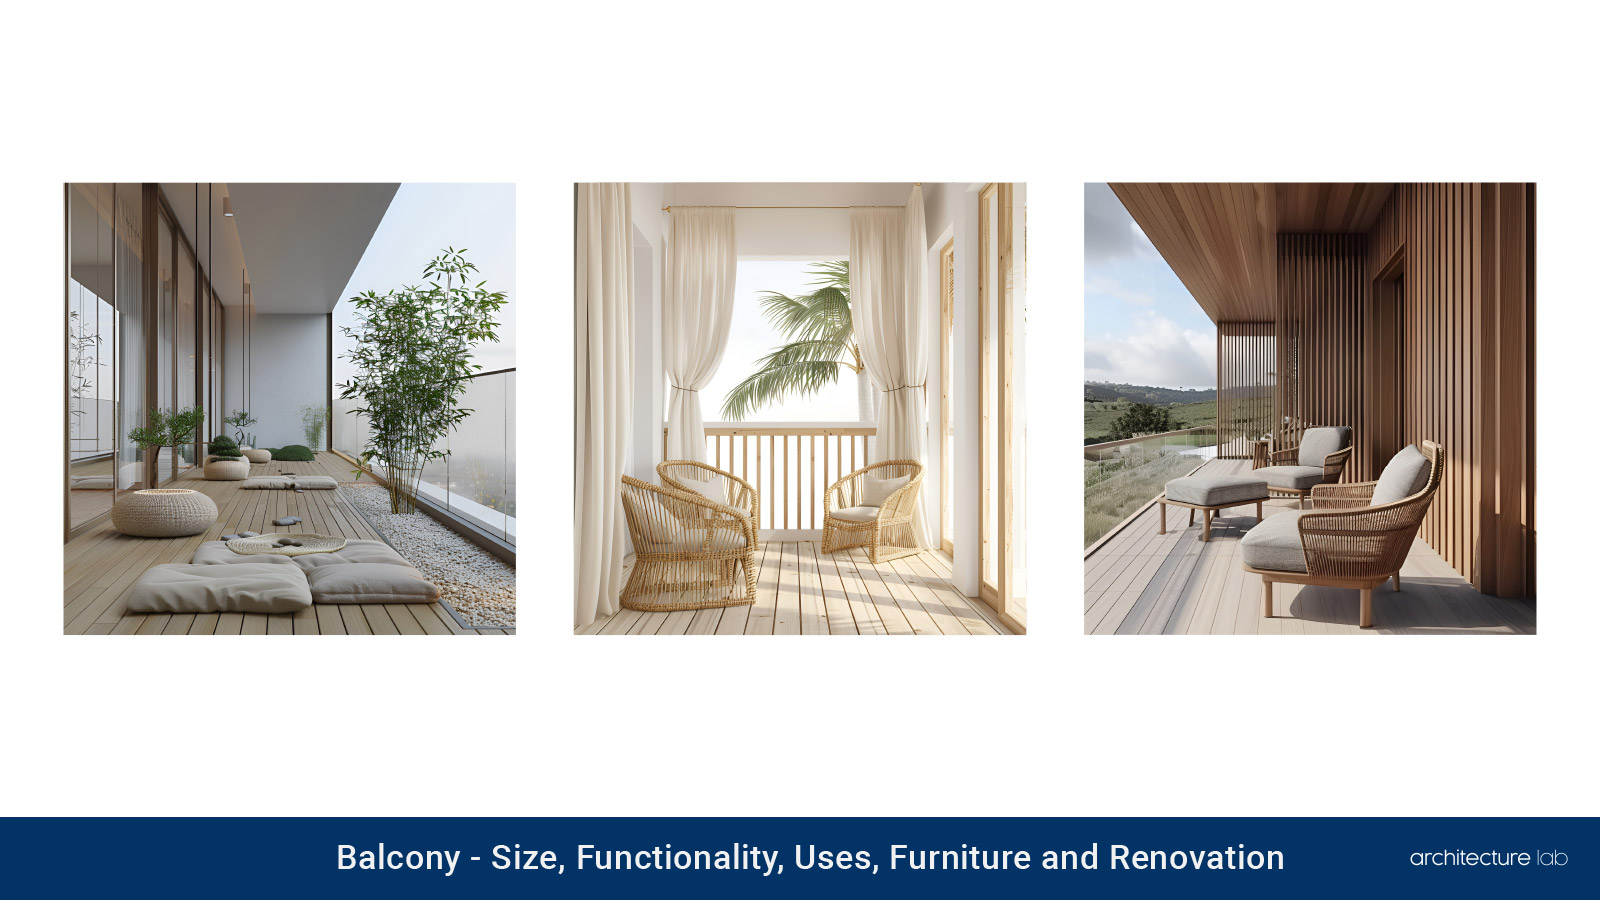 Balcony: size, functionality, uses, furniture and renovation